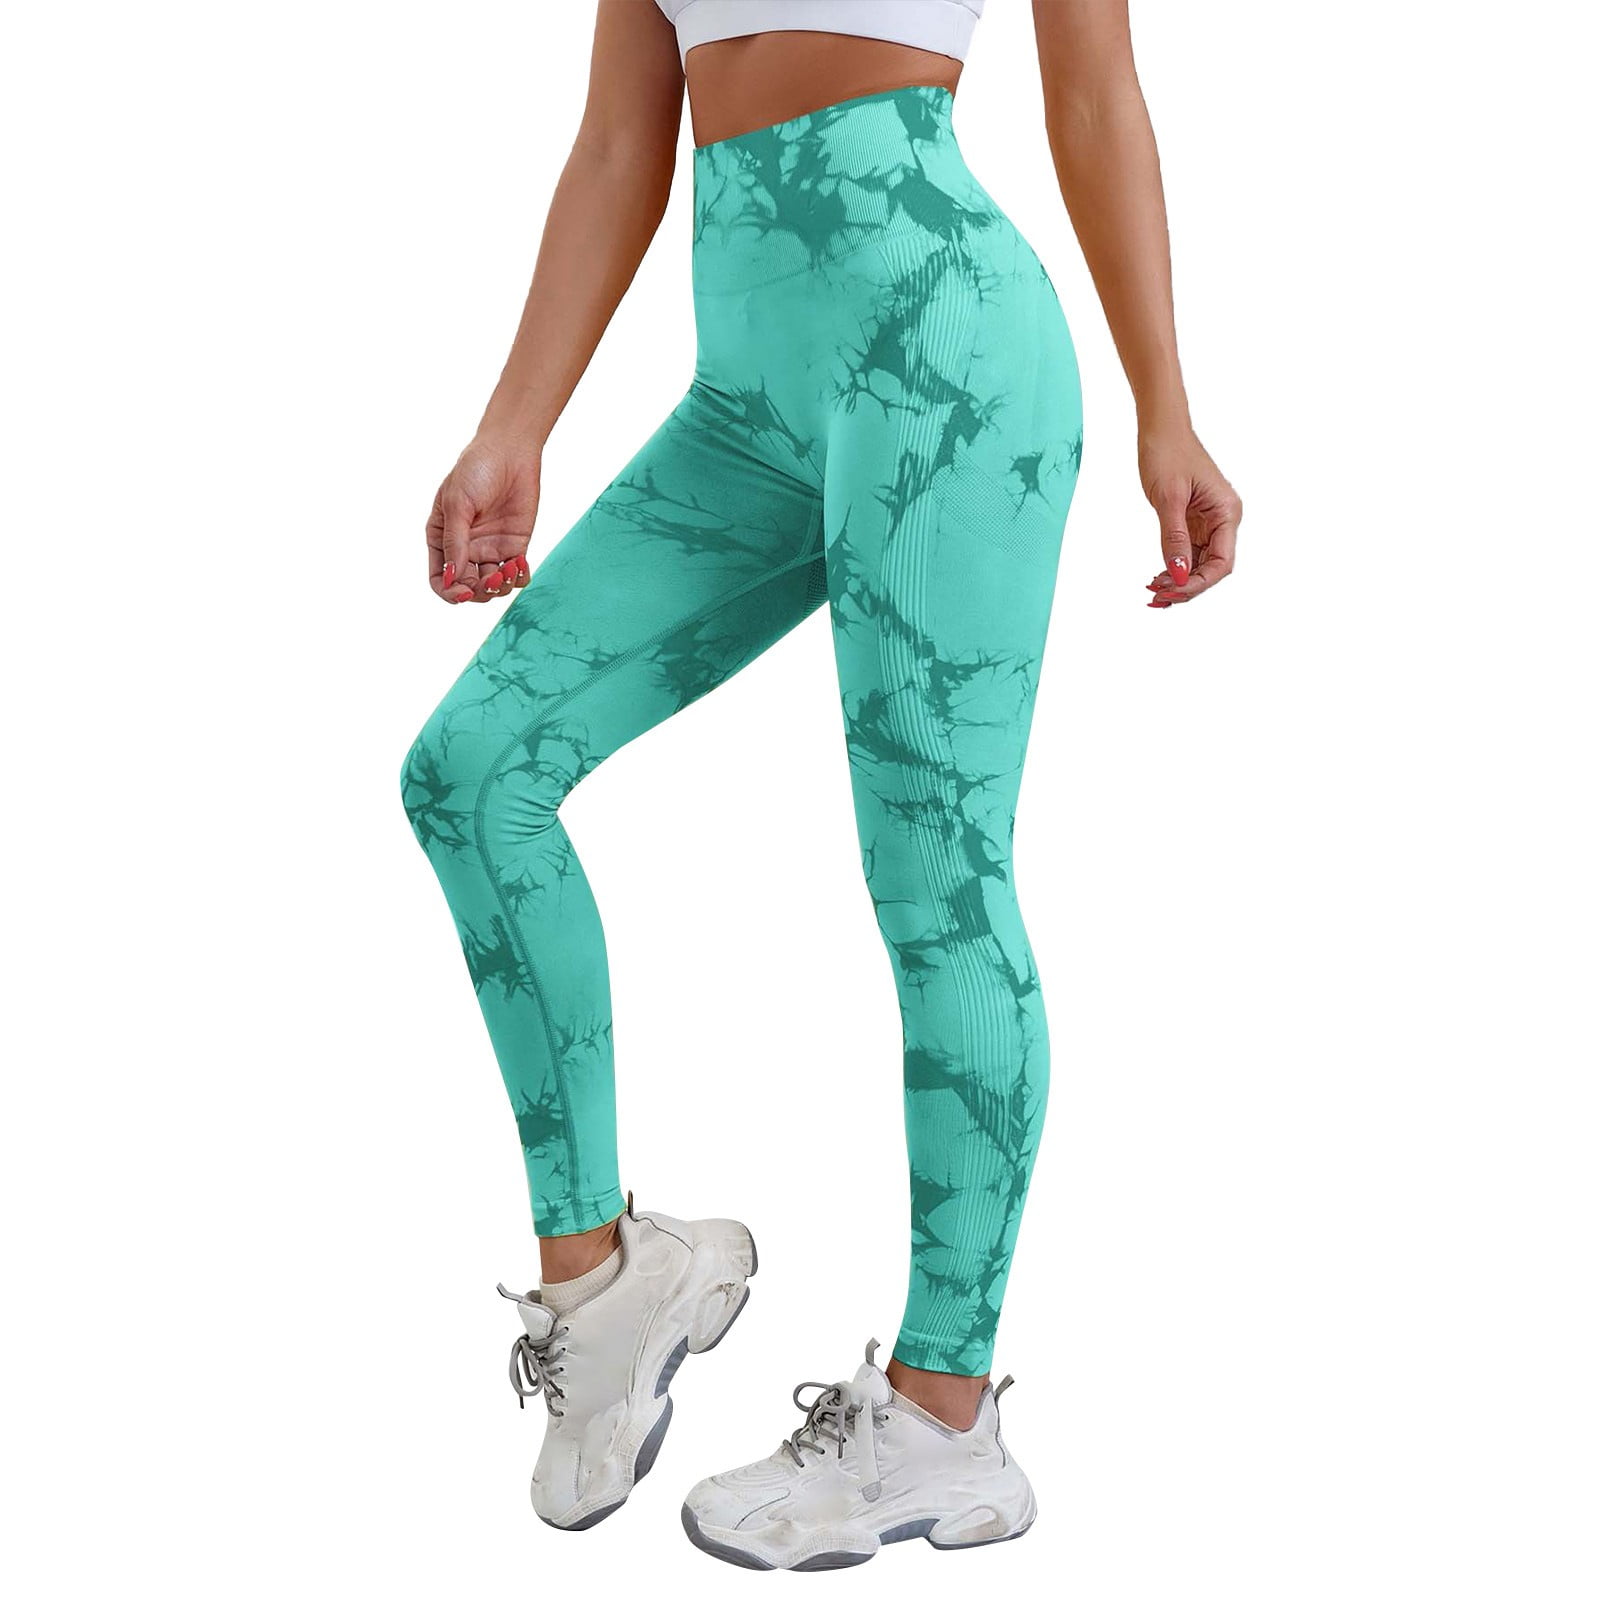  Flare Leggings For Women Tummy Control High Waisted